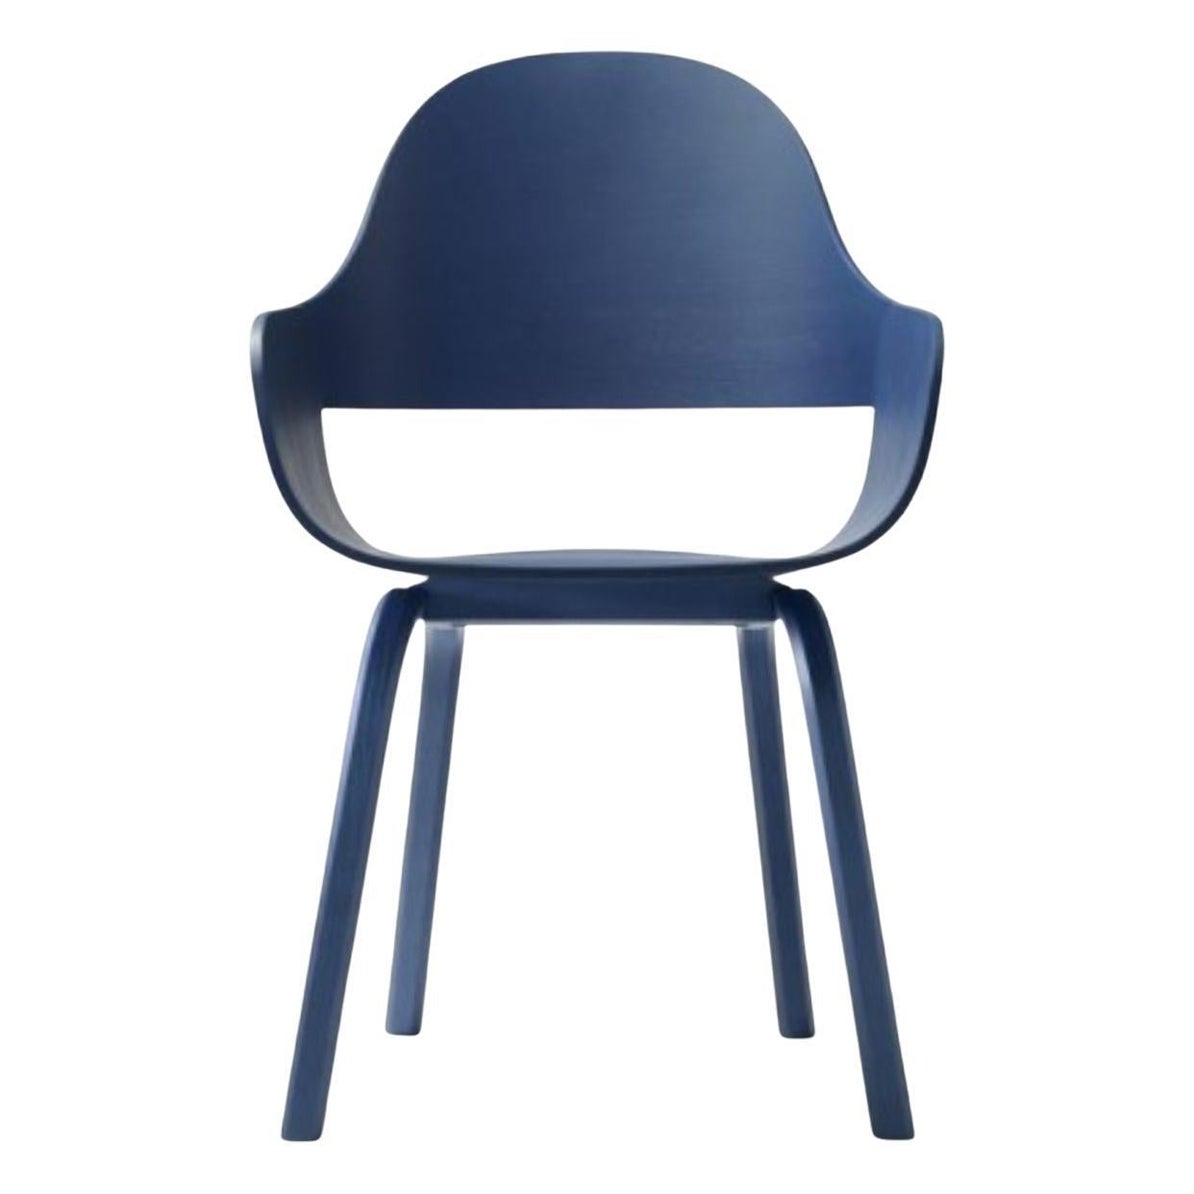 Showtime Nude 4 Legs Blue Chair by Jaime Hayon